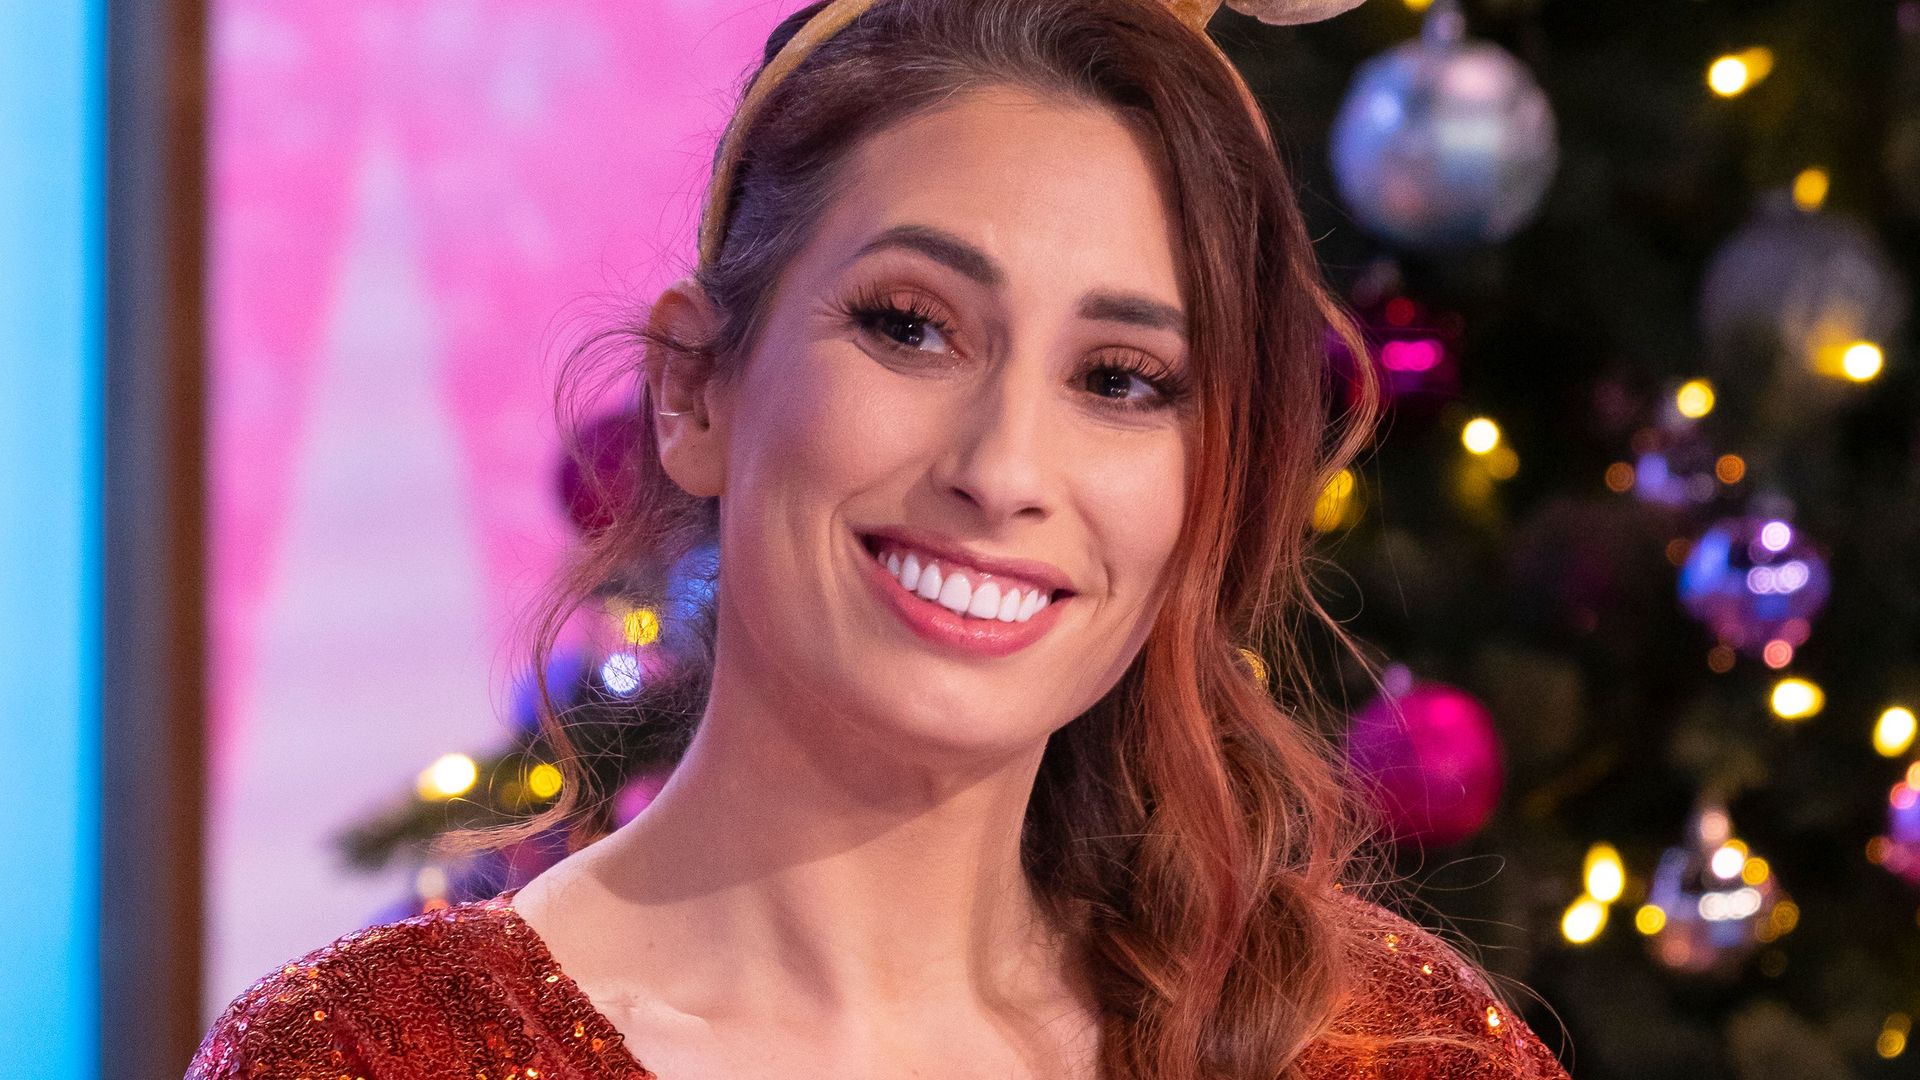 Stacey Solomon in a sparkly red dress in front of a Christmas tree